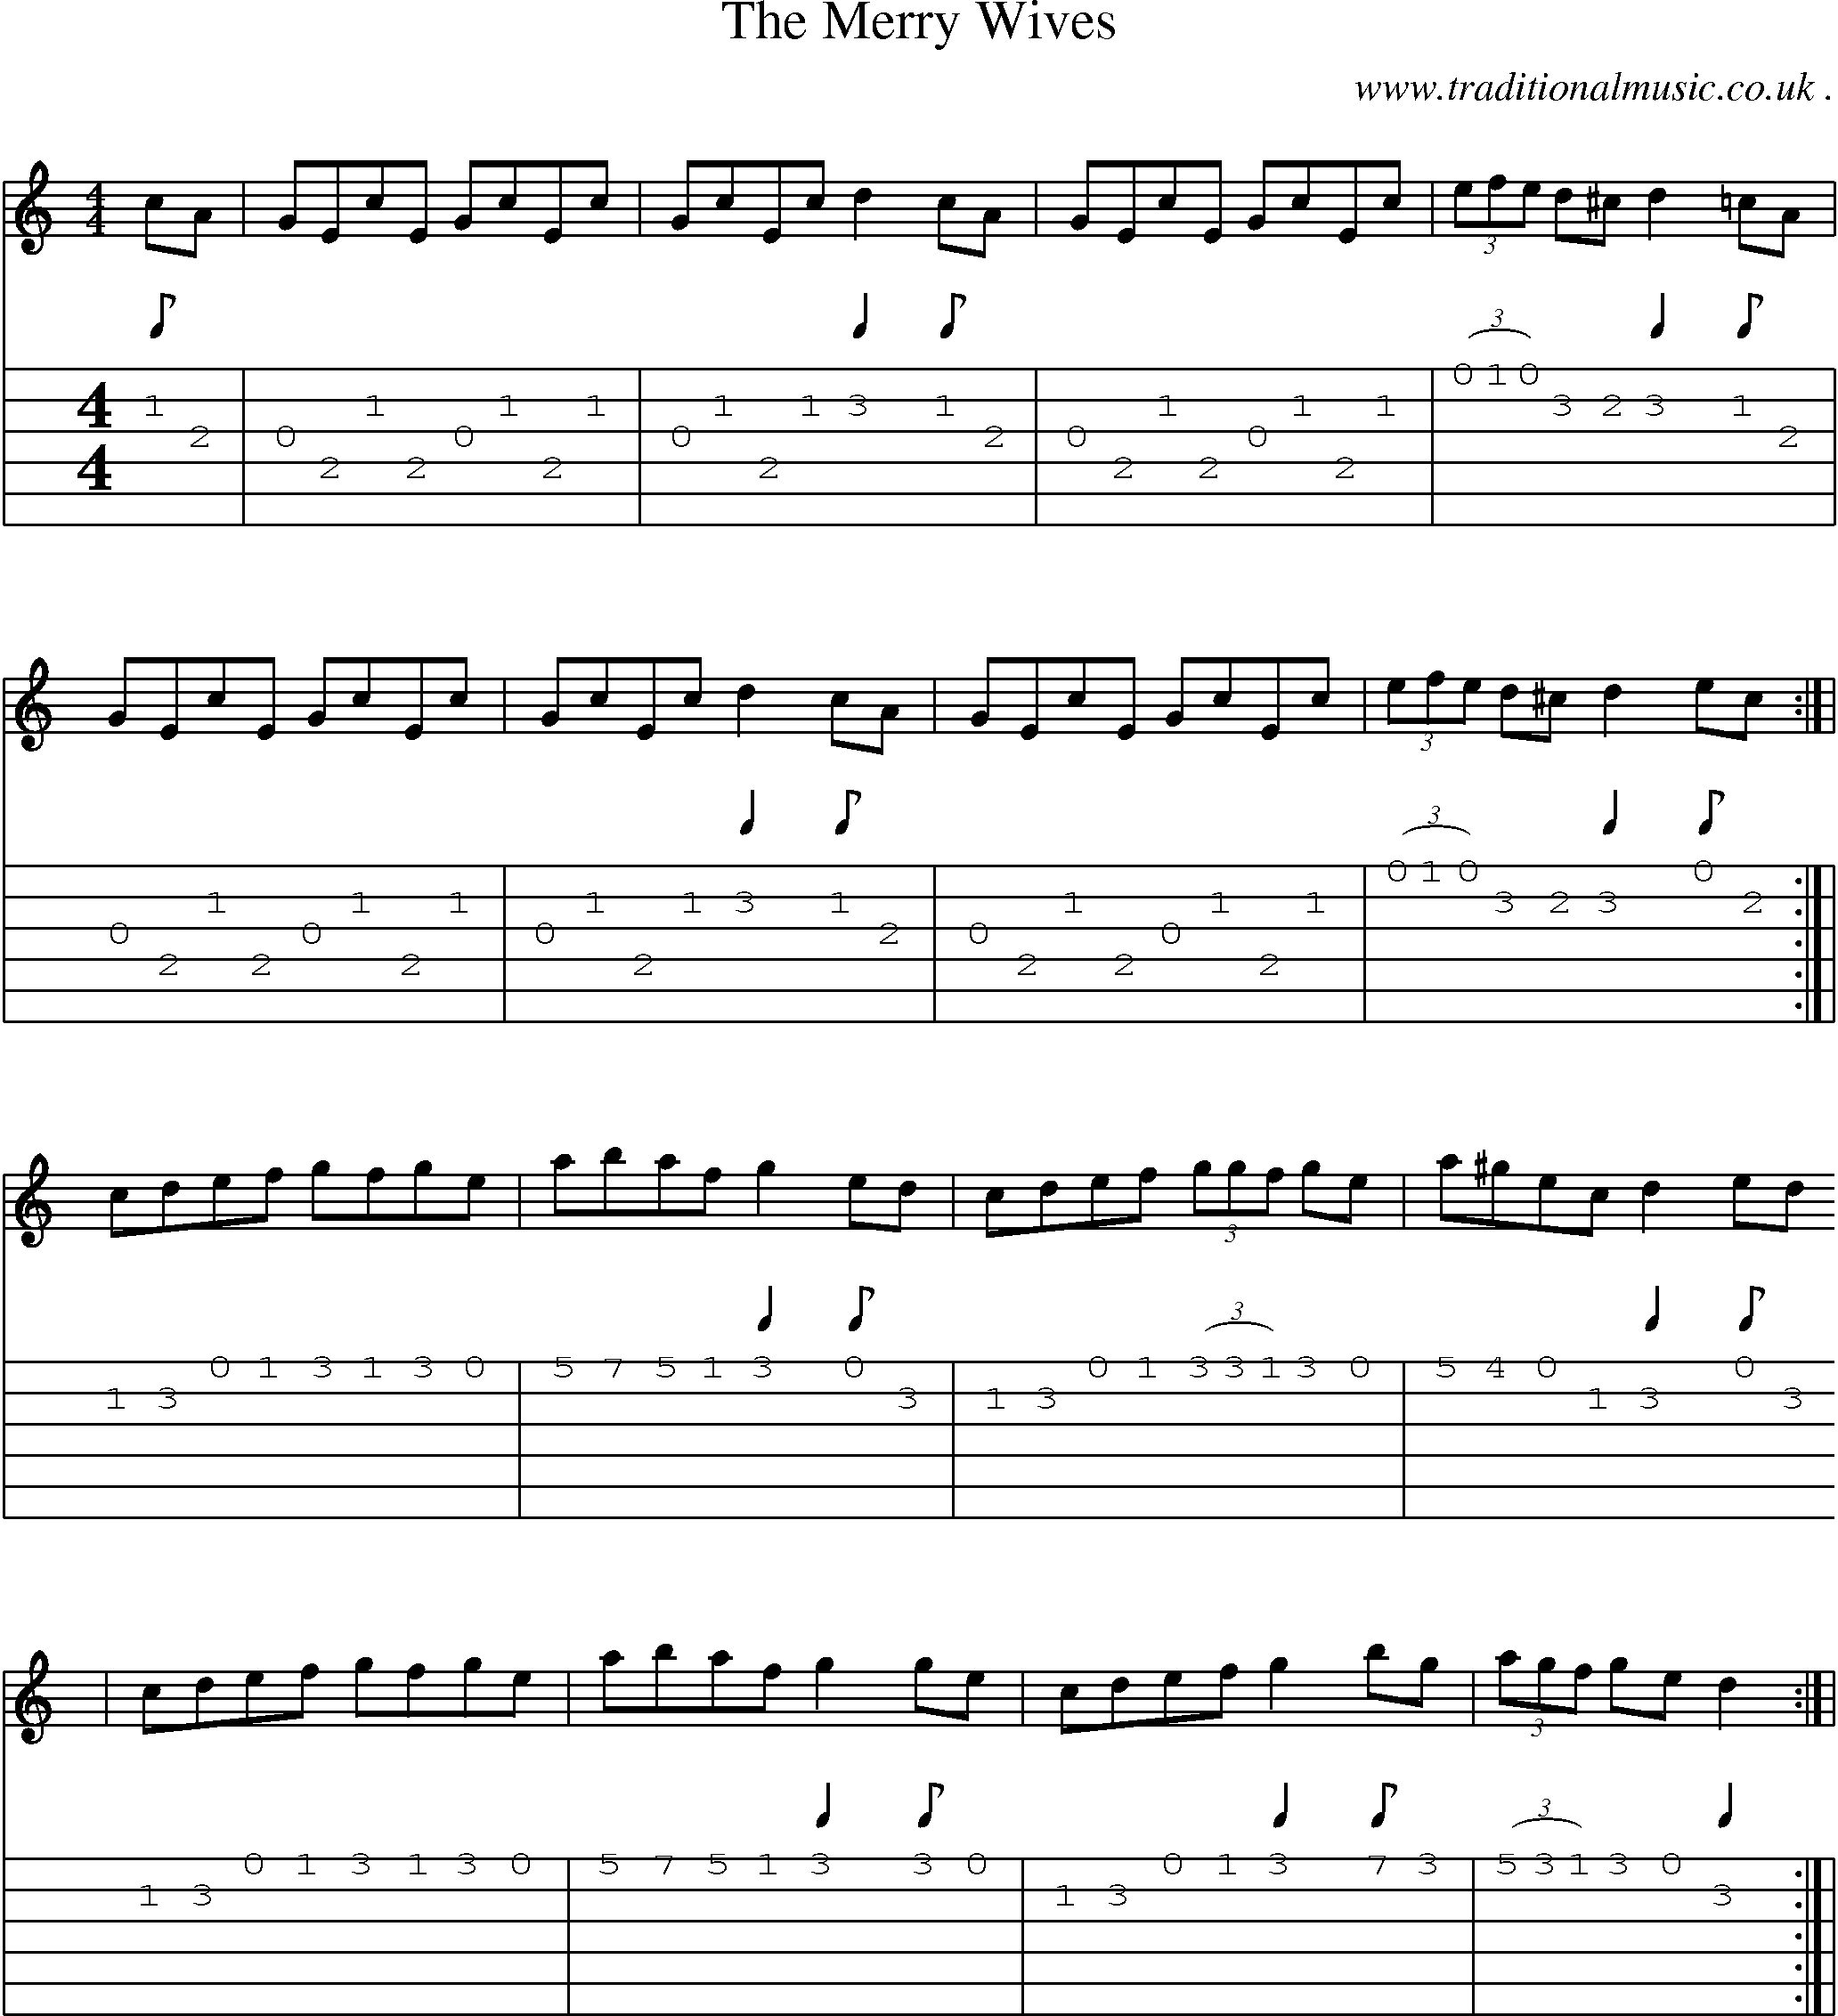 Sheet-Music and Guitar Tabs for The Merry Wives